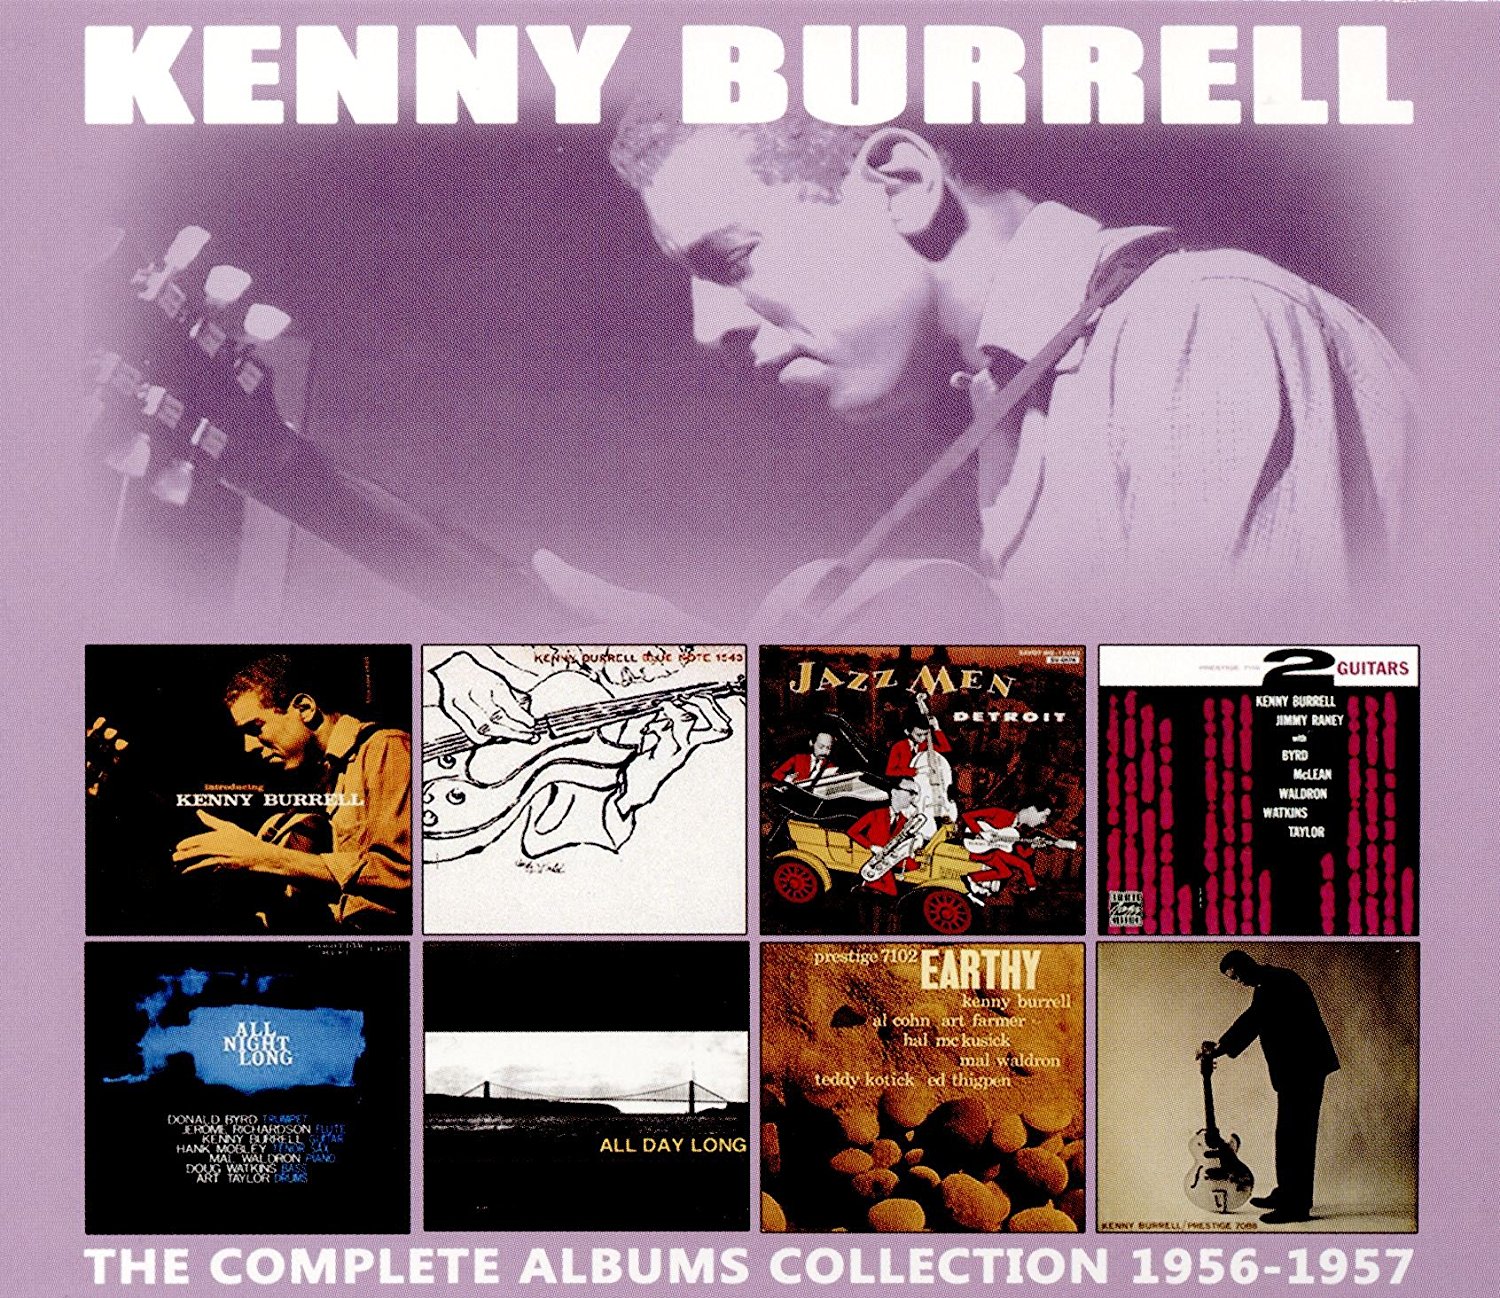 KENNY BURRELL - The Complete Albums Collection 1956-1957 cover 